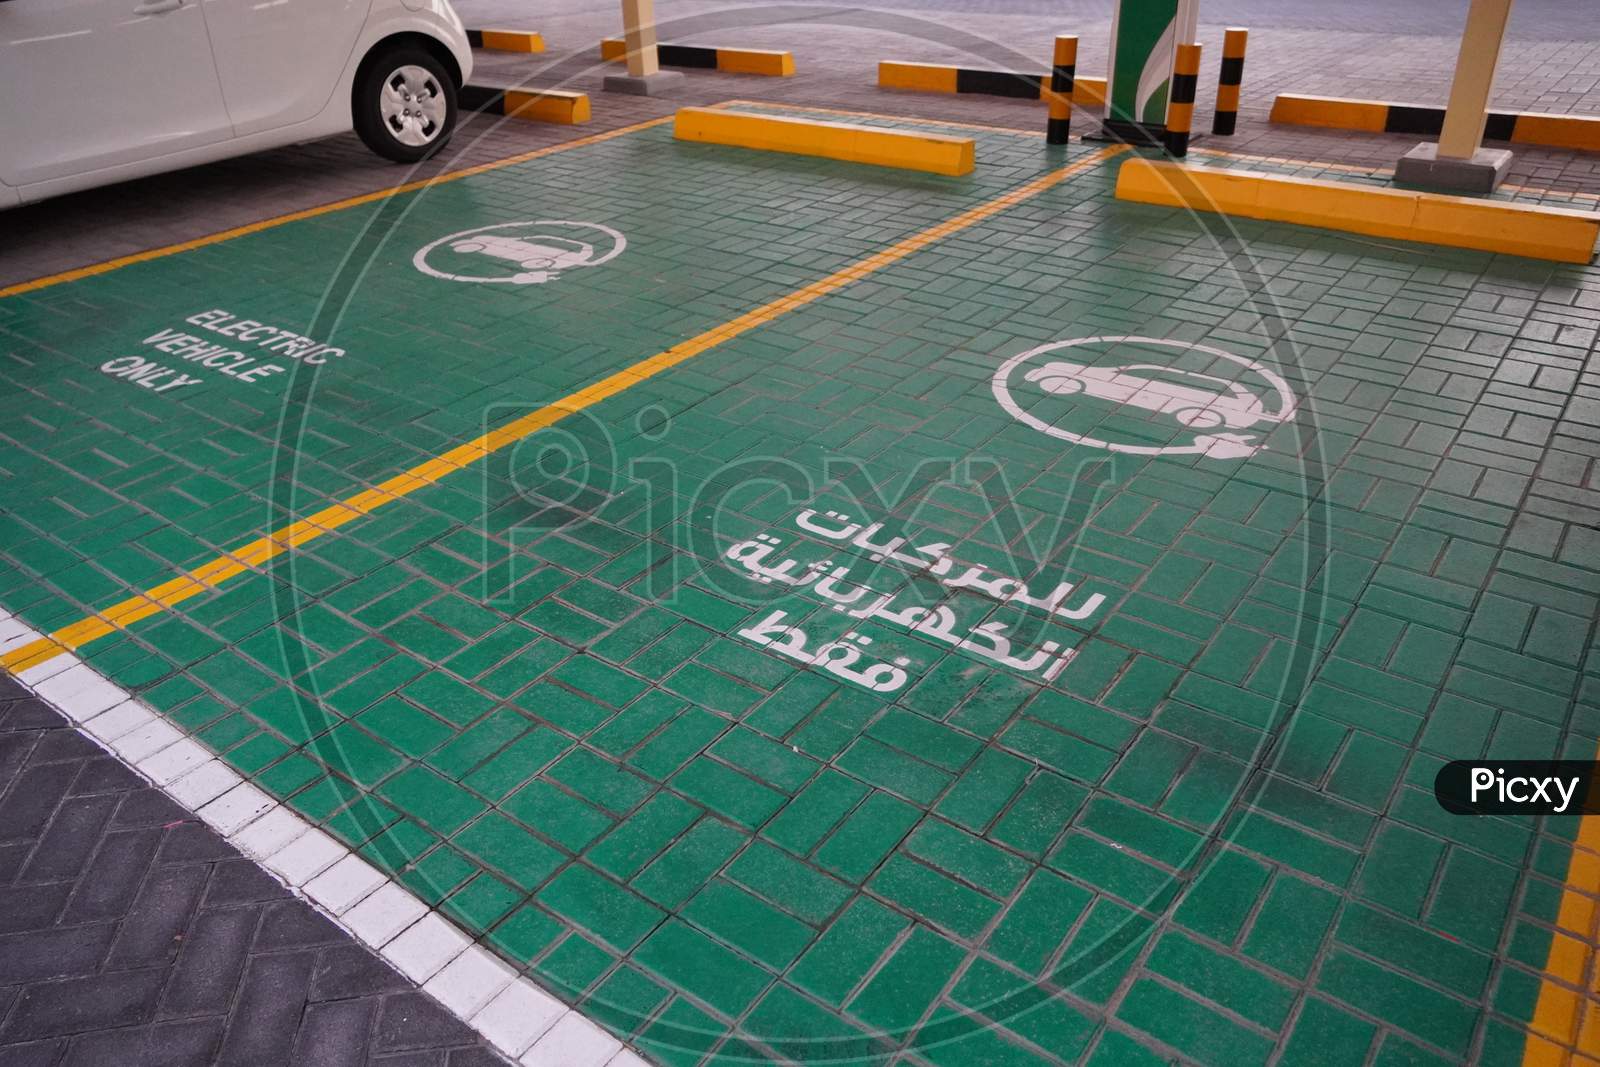 Green Electric Vehicle Charging Station Sign In A Parking Bay. Electric Vehicle Parking Space. Electric Car Charging Station. India